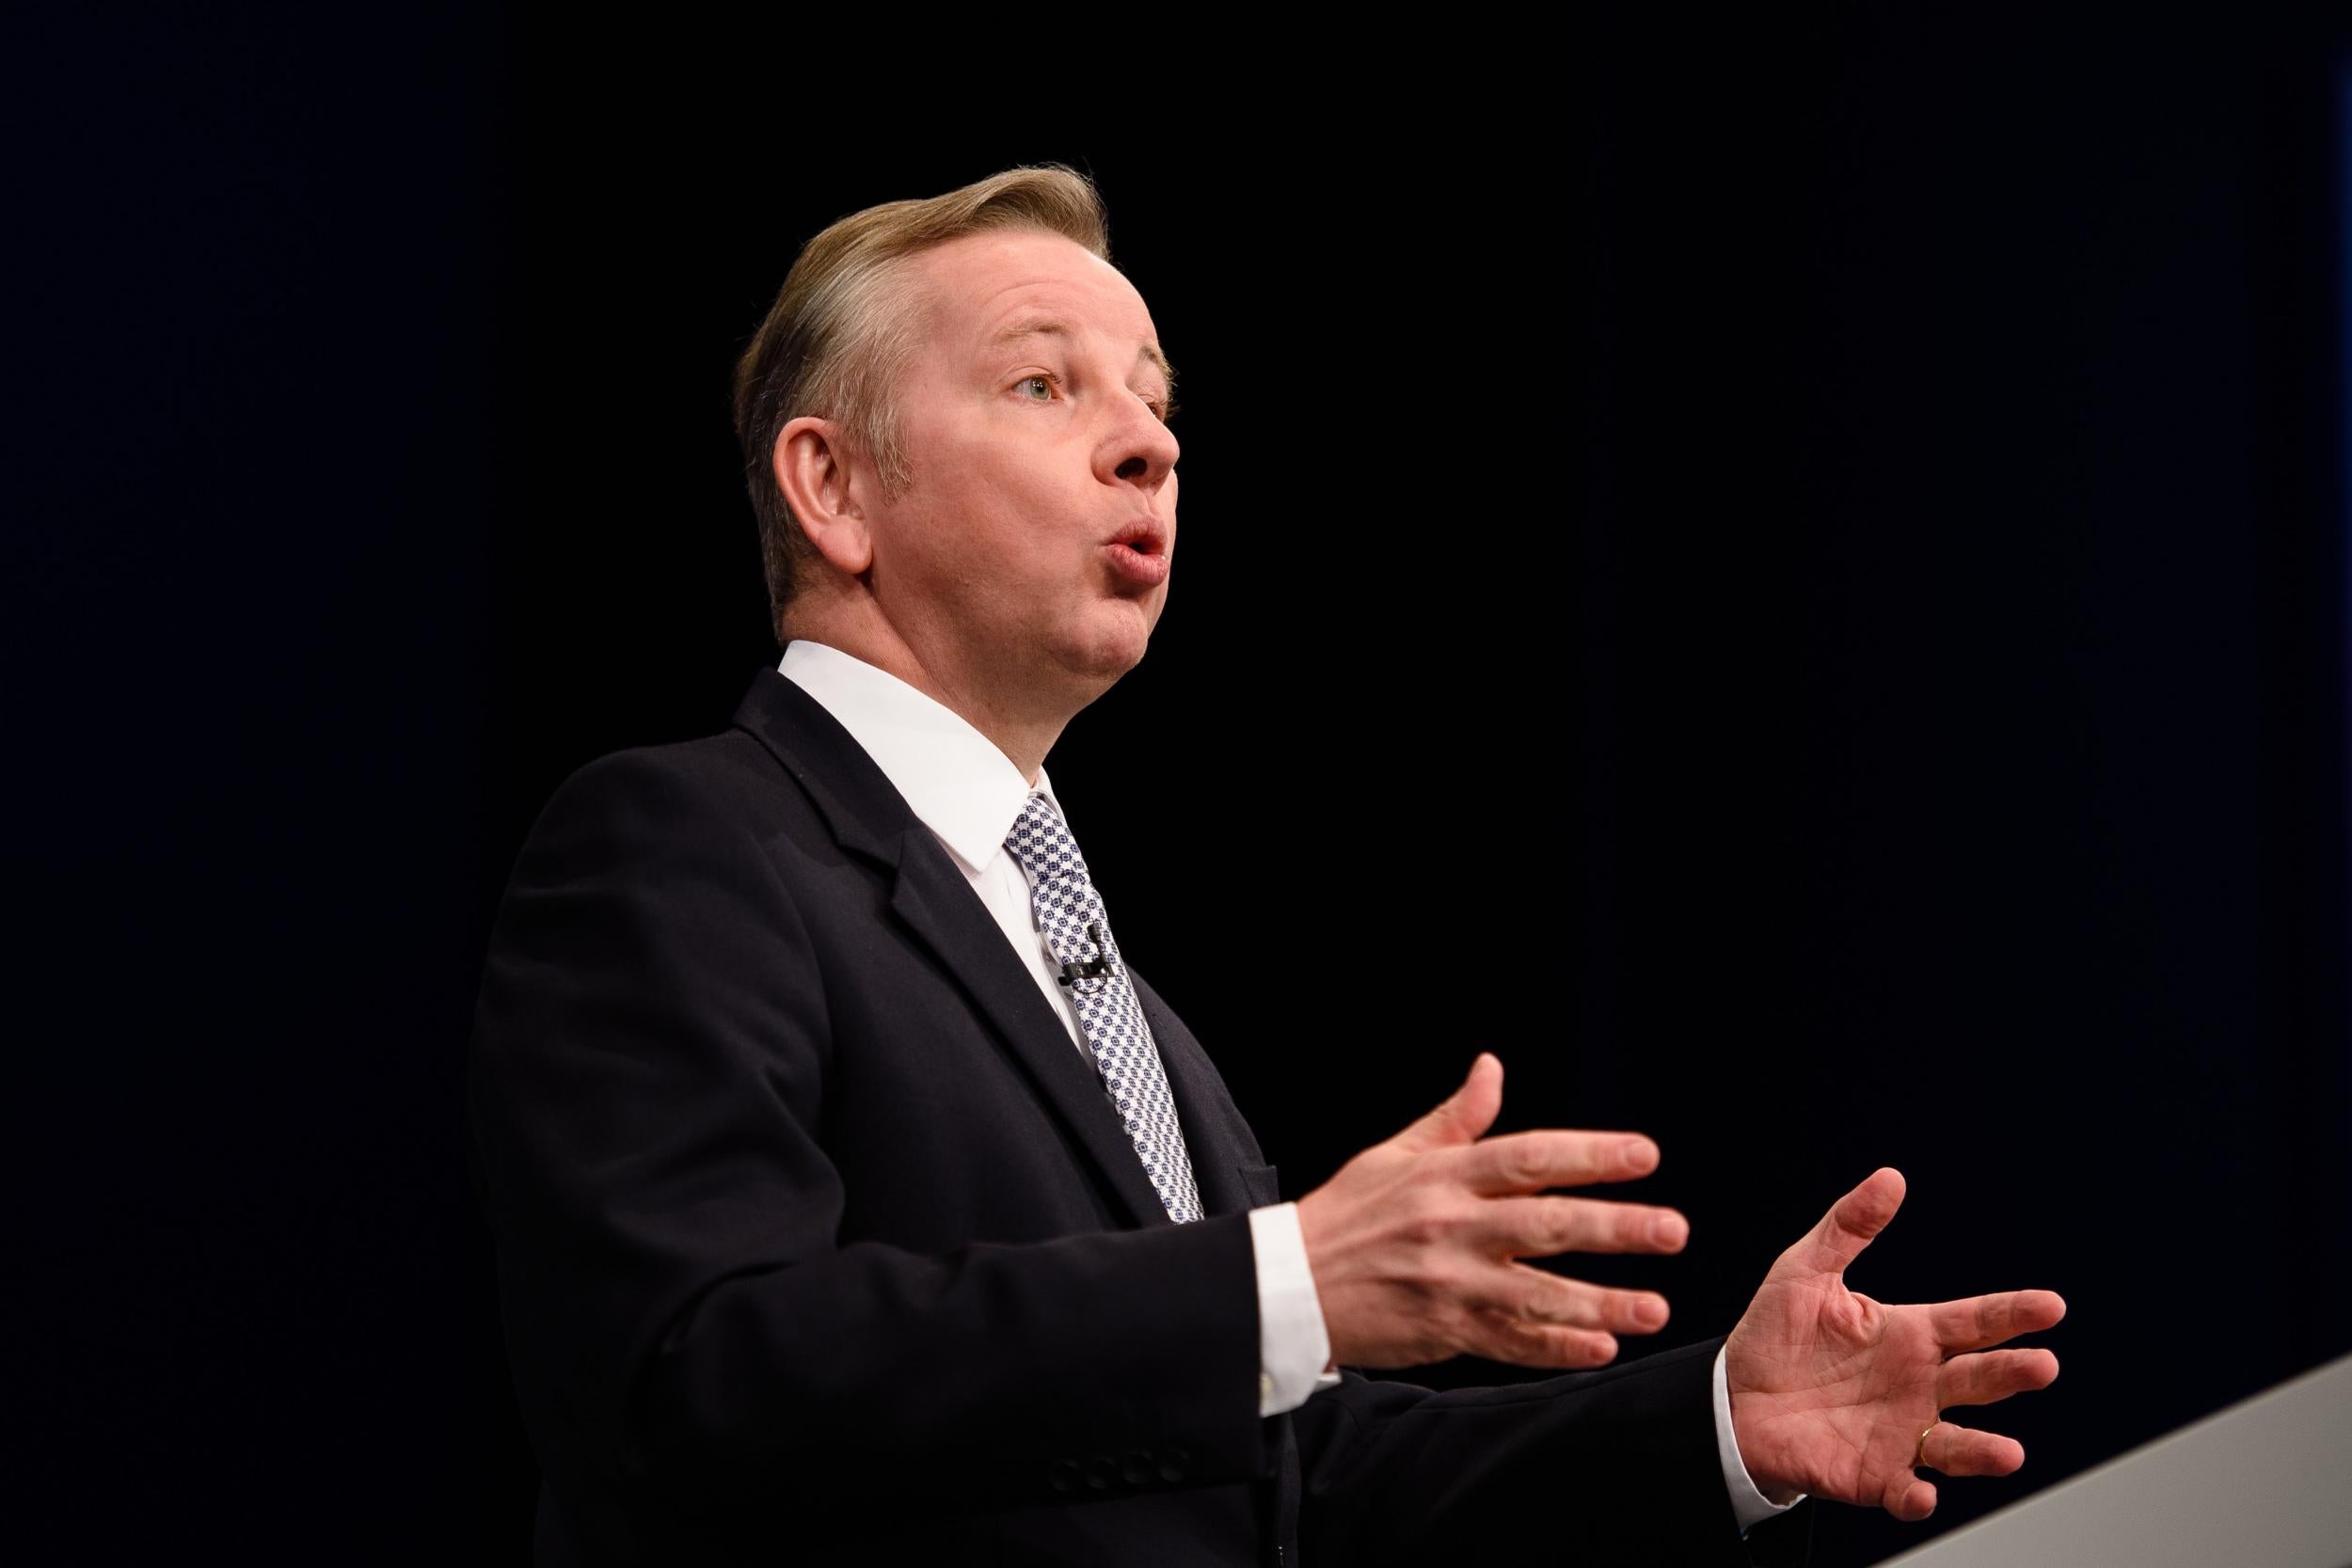 Michael Gove addresses delegates at the 2015 Conservative Party Conference in Manchester